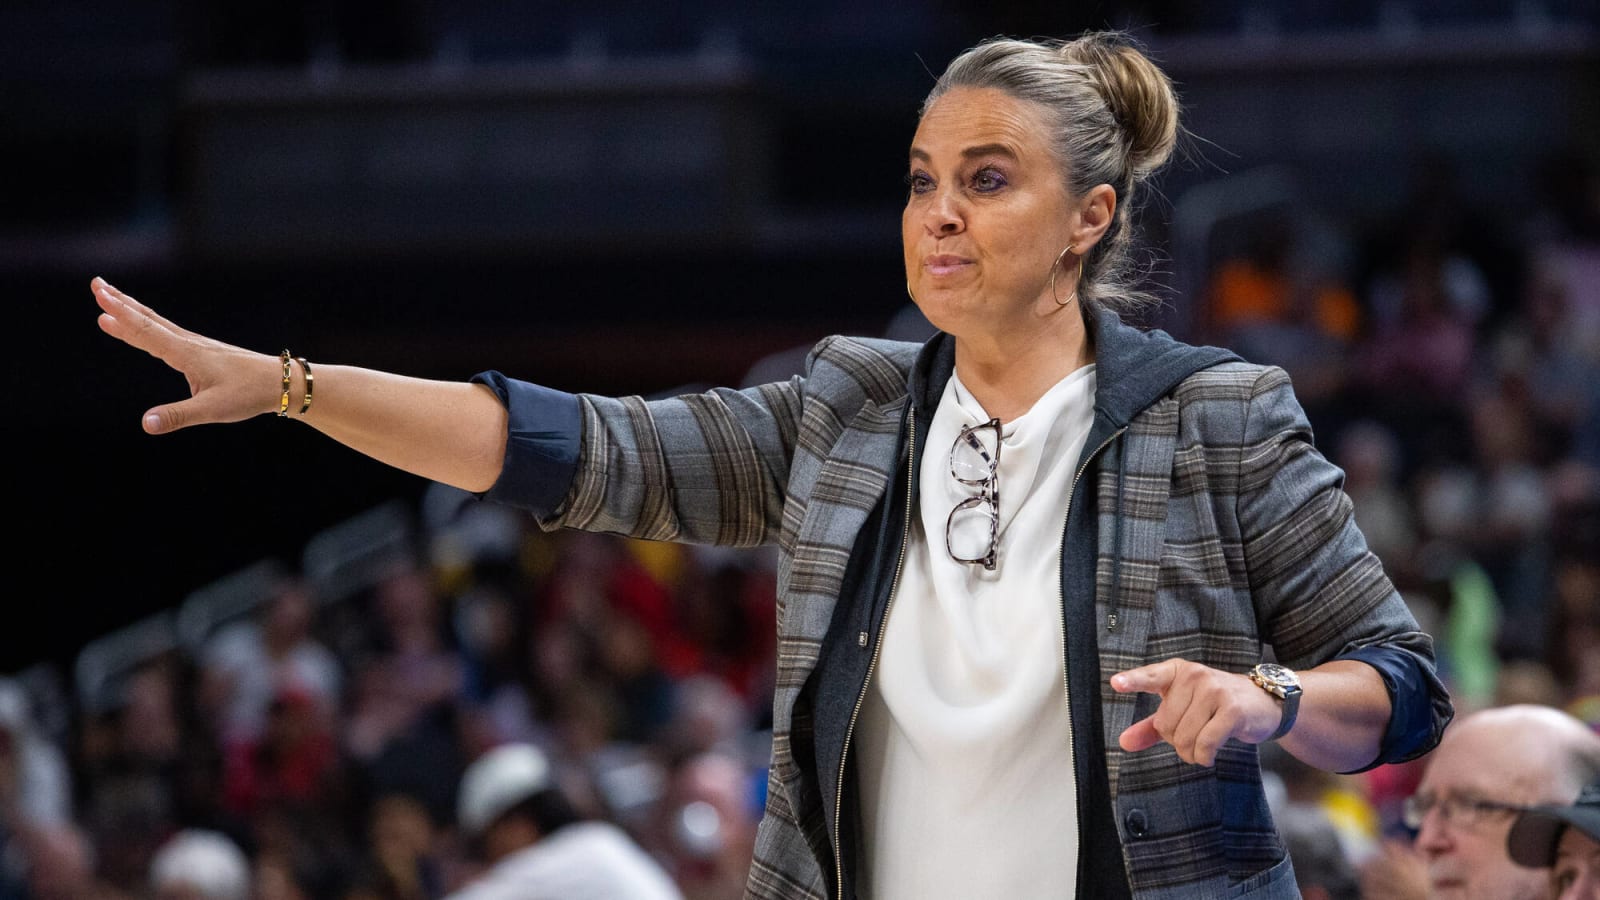 'Can’t put him in LeBron, Steph, Embiid, type of tier' – Becky Hammon clears stance on Jalen Brunson after backlash over calling Knicks’ star ‘small’